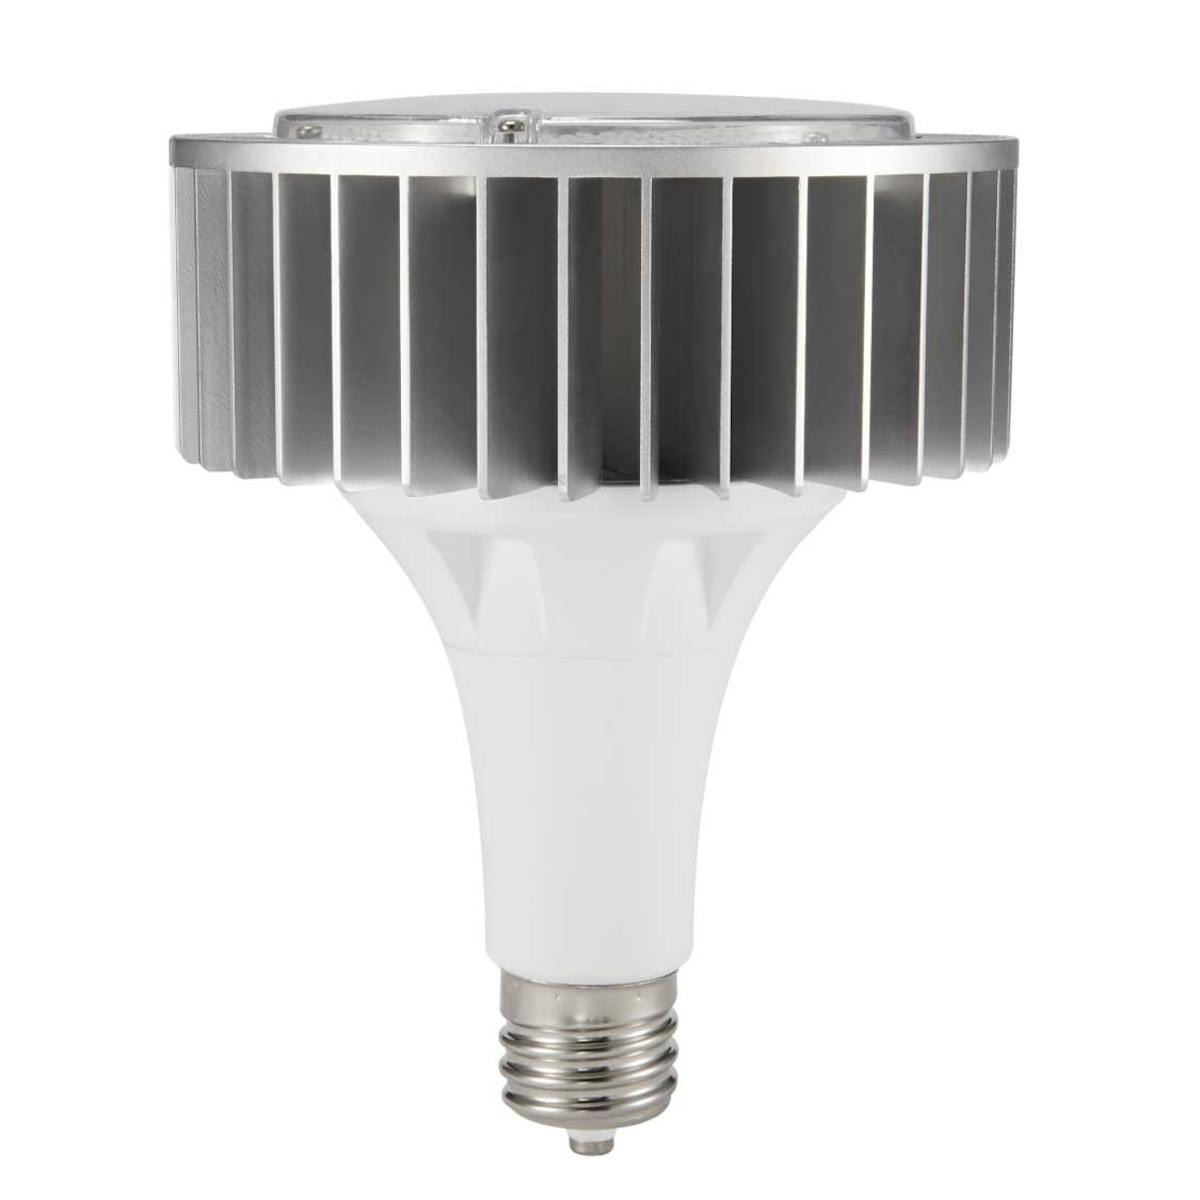 Foreverlamp introduces new J Series LED Plug and Play High-Bay lamp